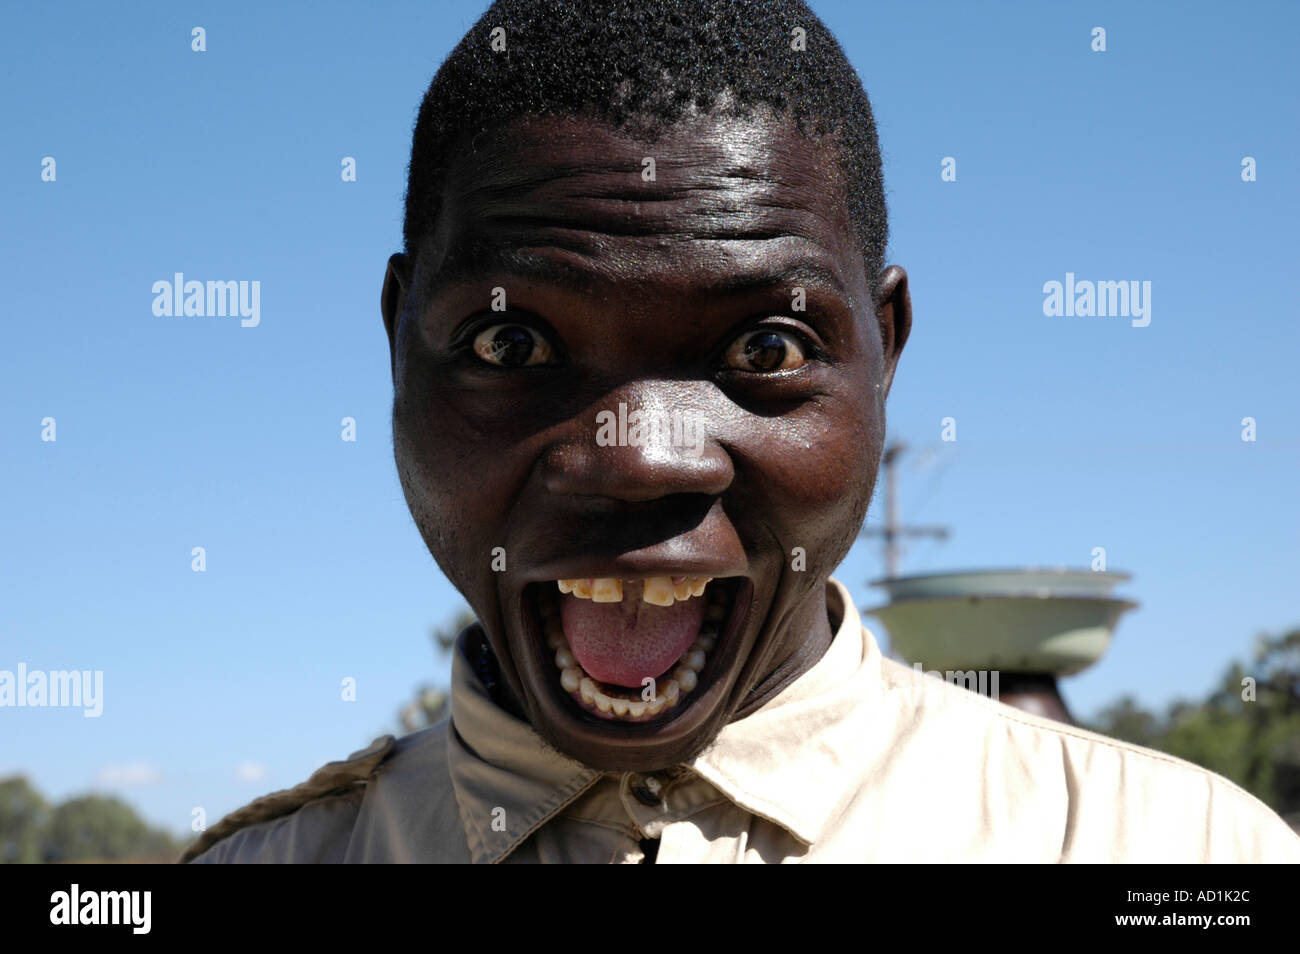 African man with mouth and eyes wide open in a look of total amazement Stock Photo